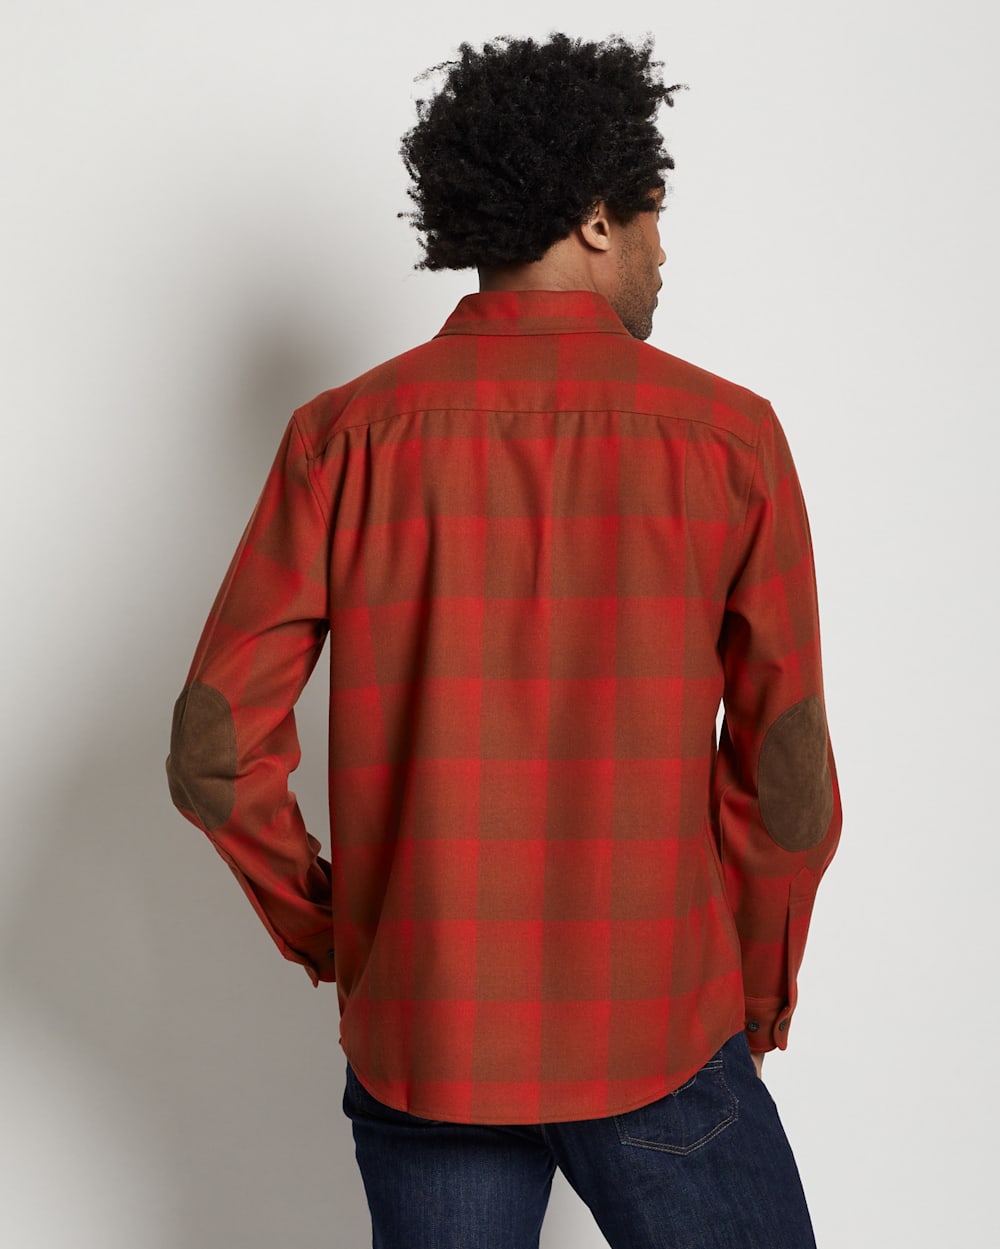 ALTERNATE VIEW OF MEN'S PLAID TRAIL SHIRT IN RED/COPPER OMBRE image number 4